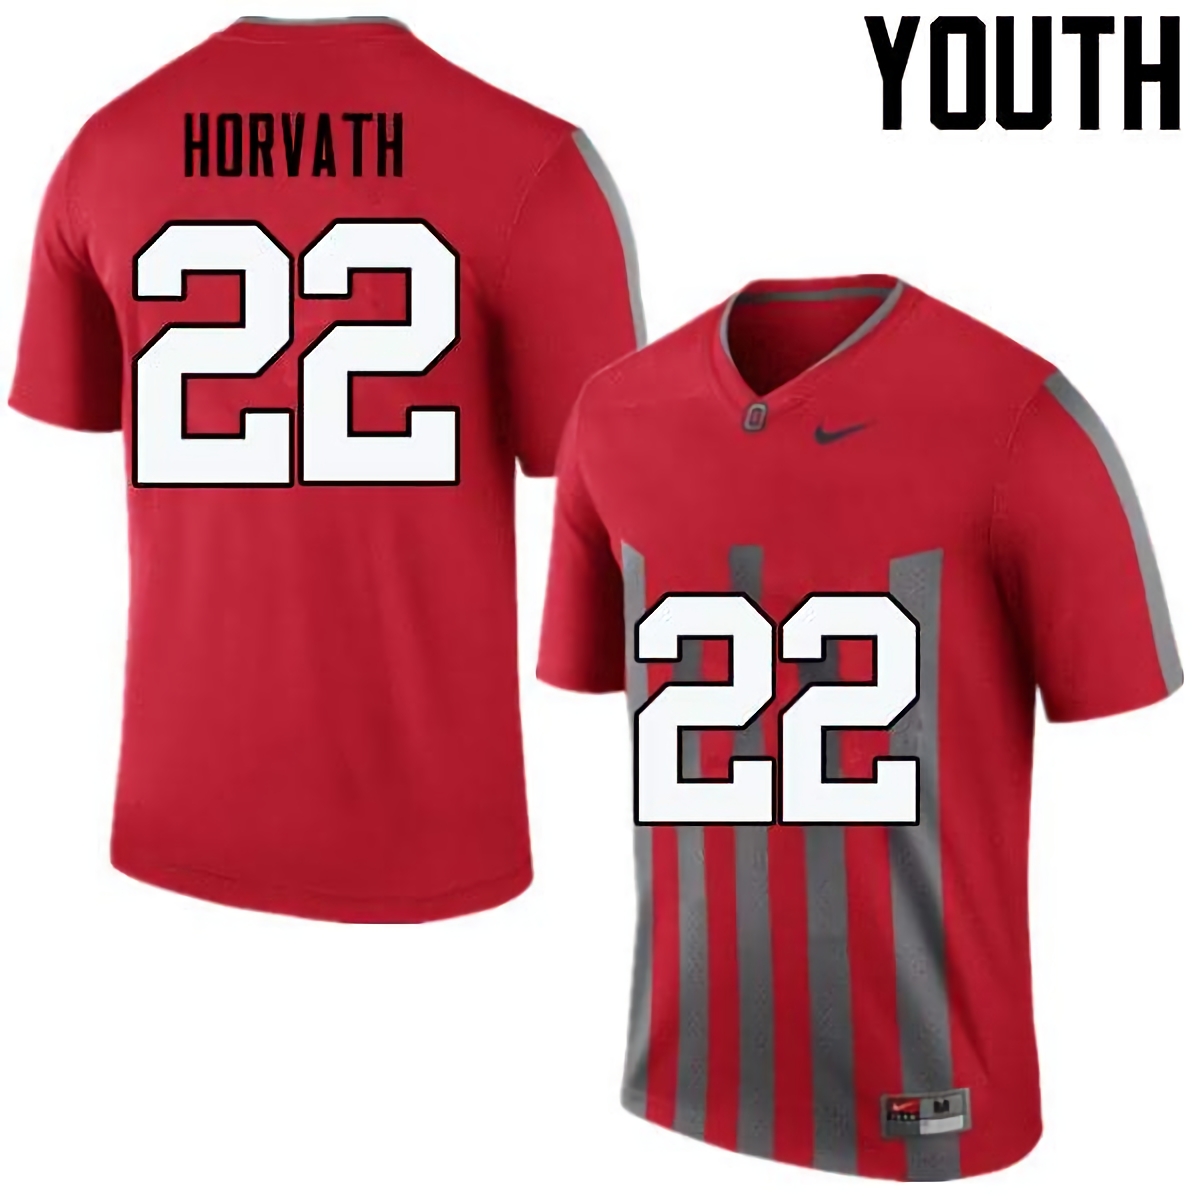 Les Horvath Ohio State Buckeyes Youth NCAA #22 Nike Throwback Red College Stitched Football Jersey GSA0656II